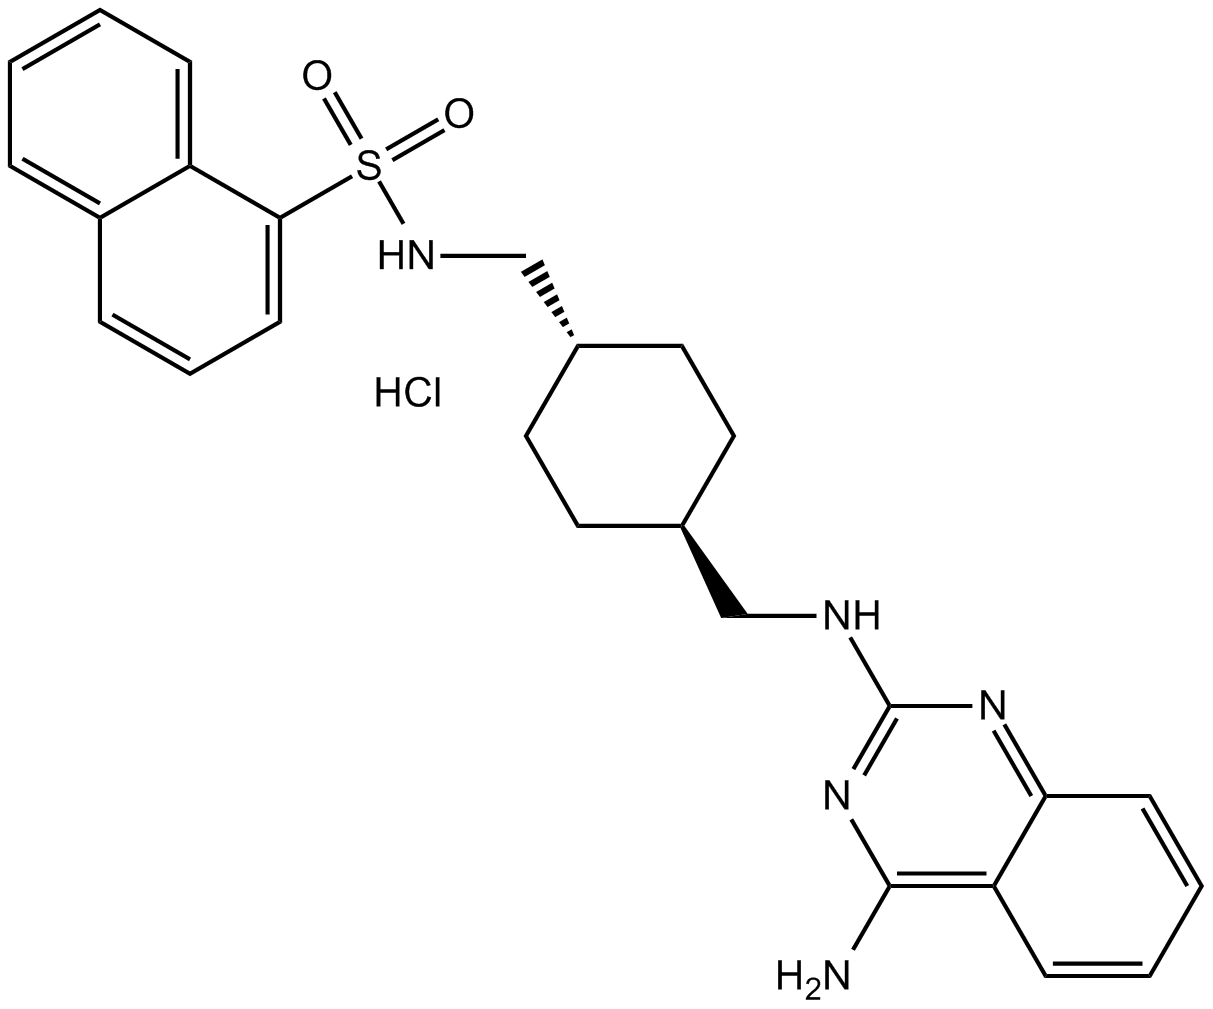 CGP 71683 hydrochloride  Chemical Structure